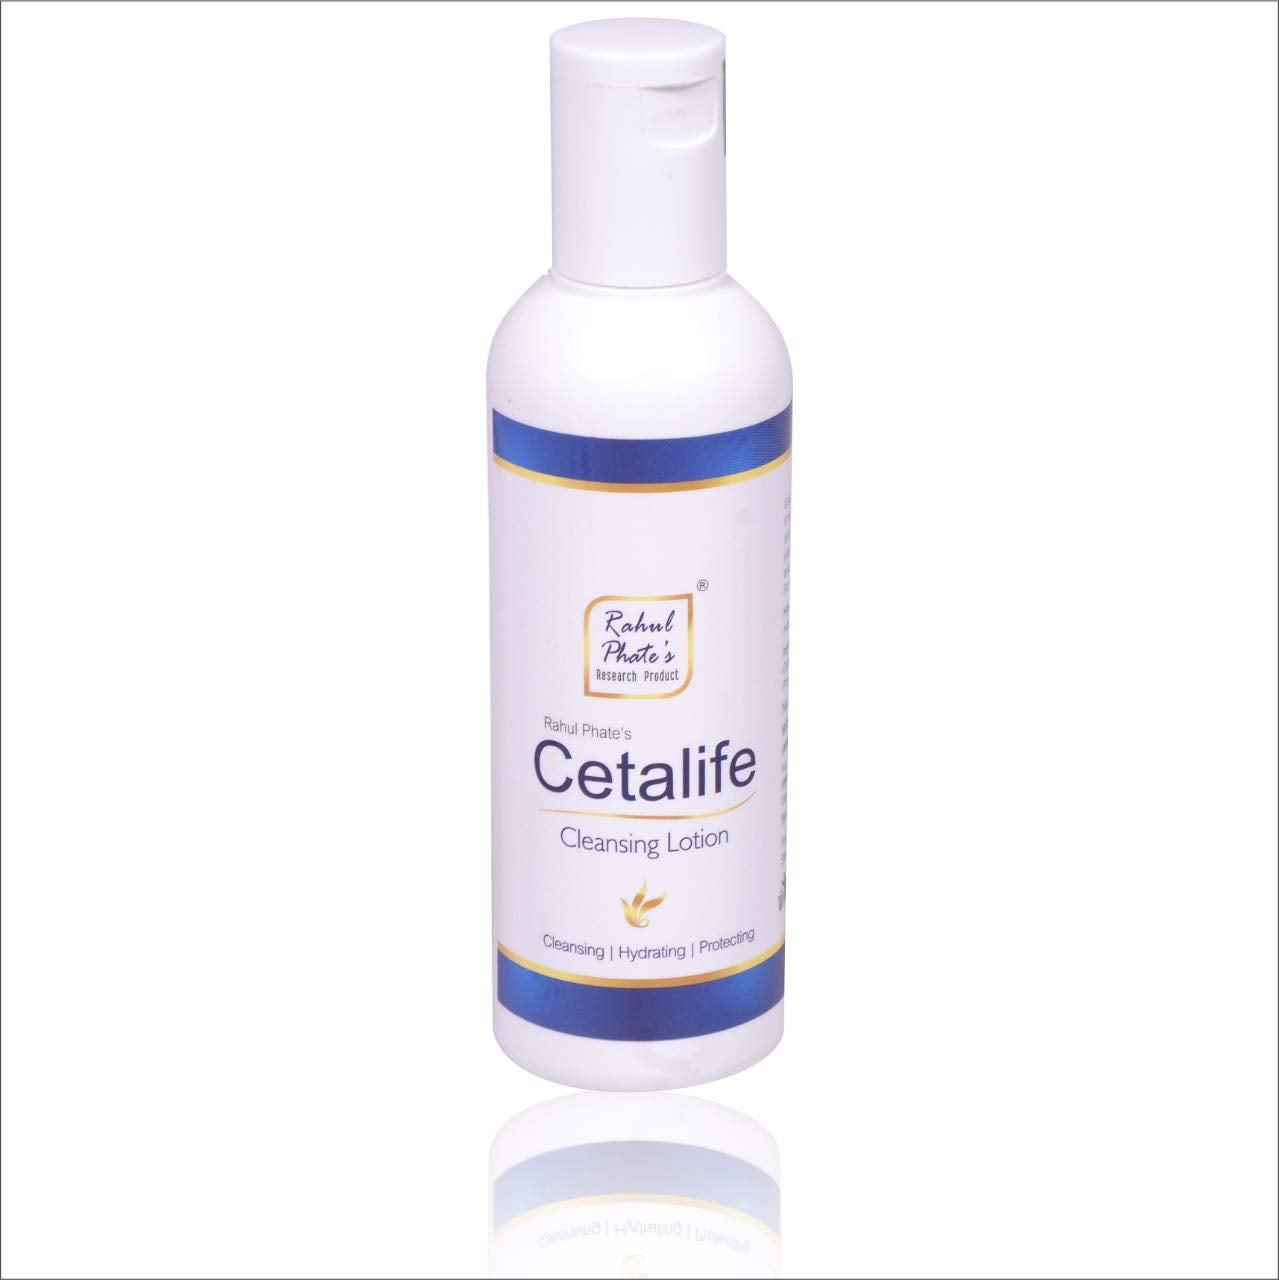 Cetalife cleansing Lotion